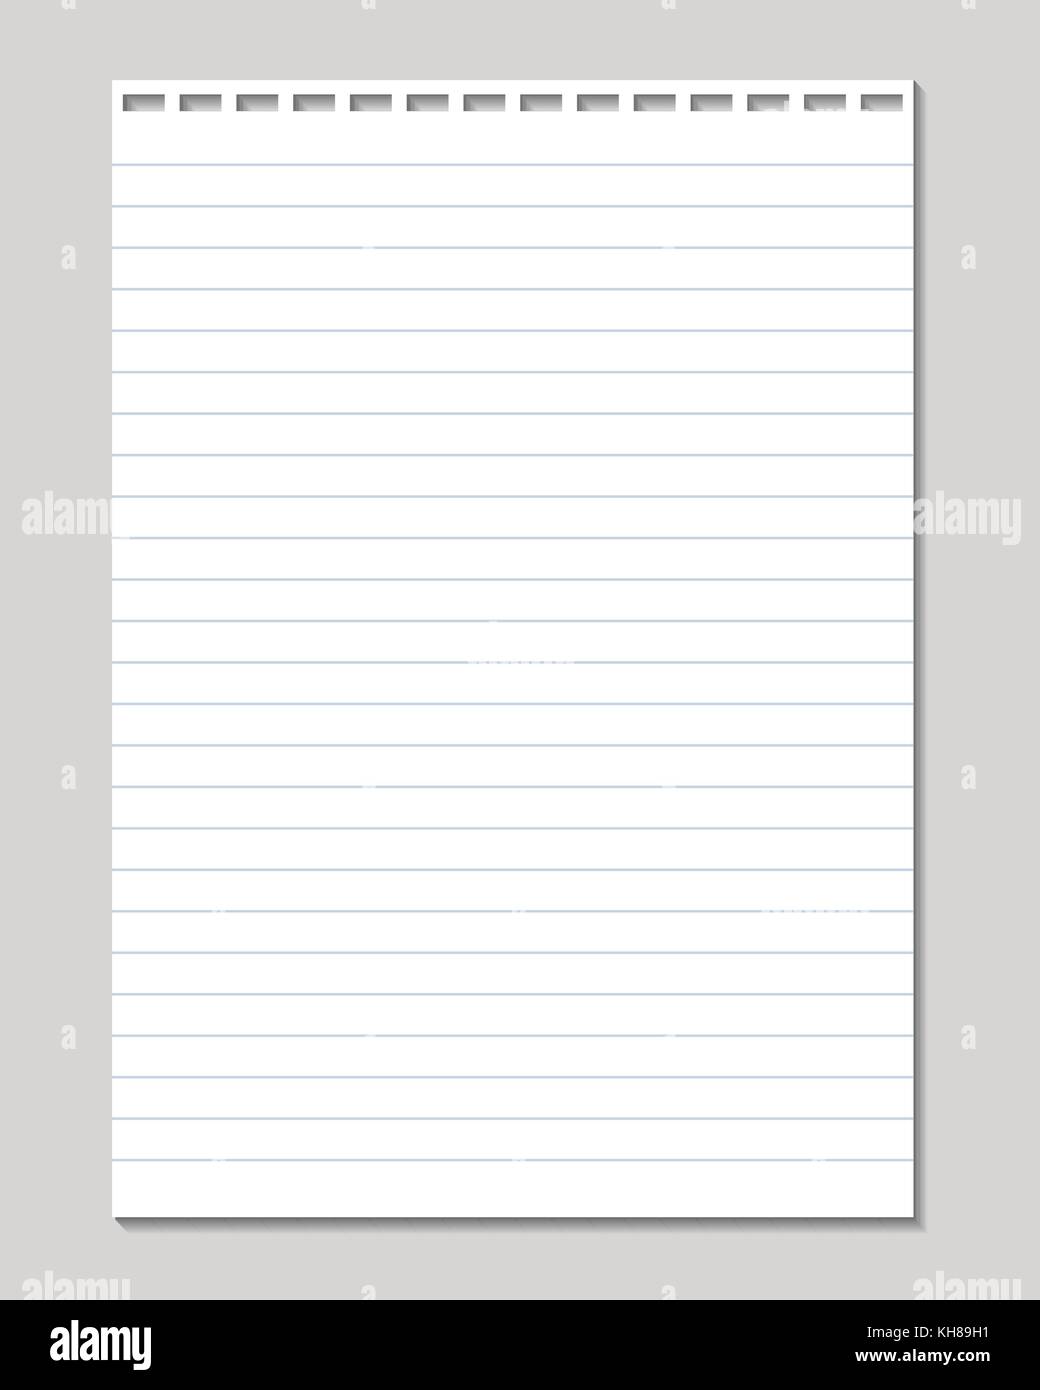 Vector sheet of lined paper with holes for binding isolated on a gray background Stock Vector